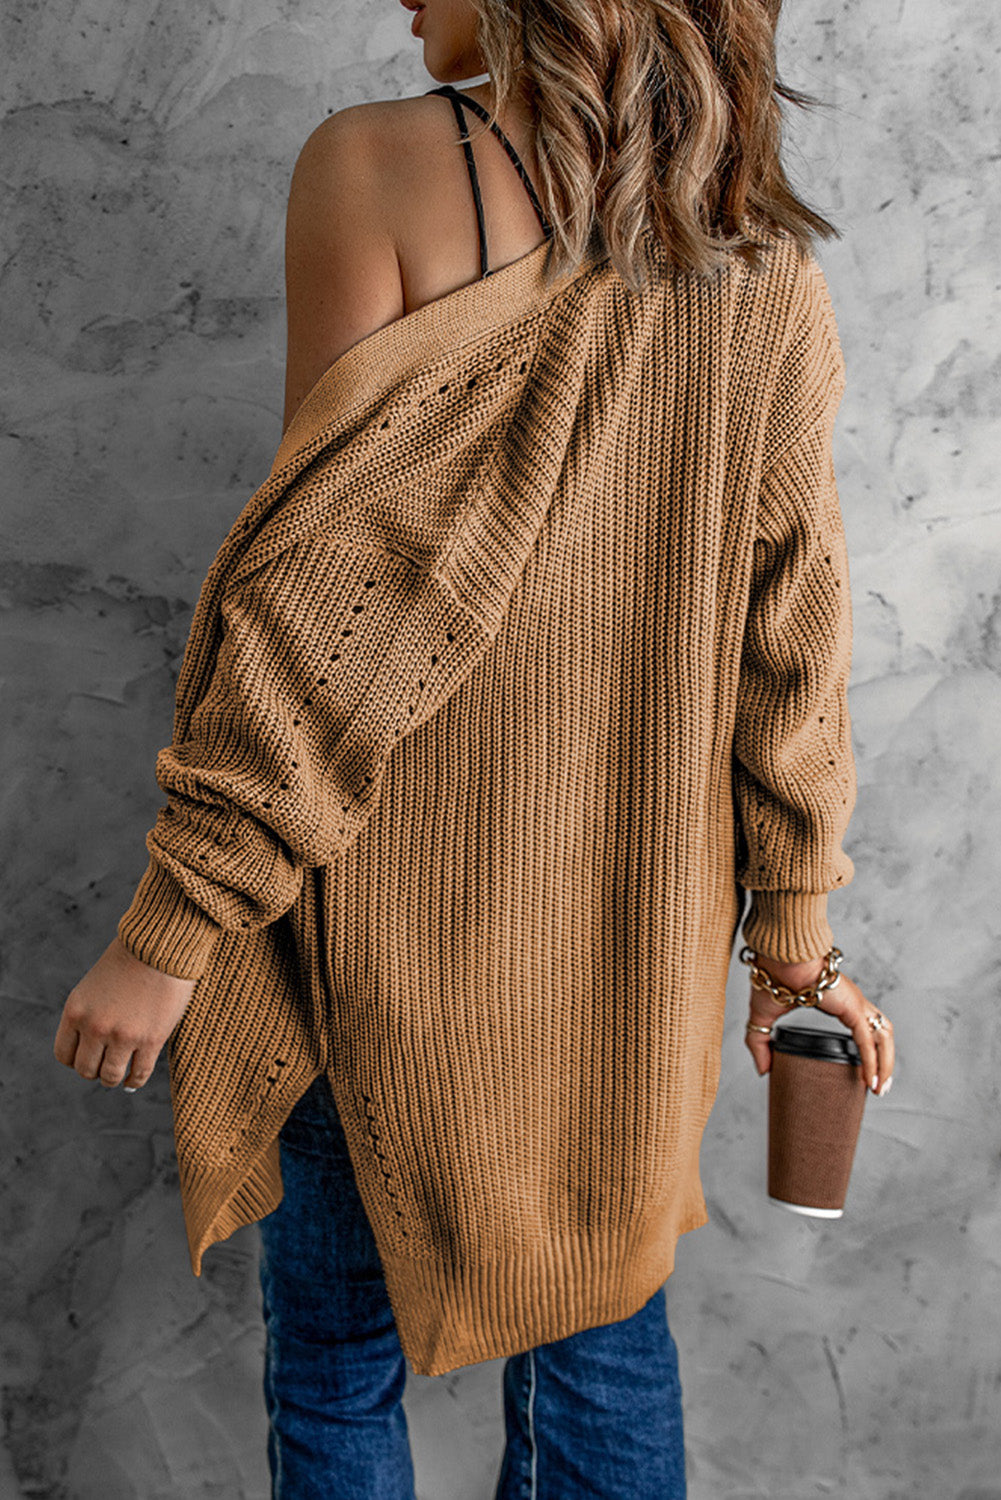 Apricot Drop Sleeve Cable Knit Cardigan with Slits Sweaters & Cardigans JT's Designer Fashion